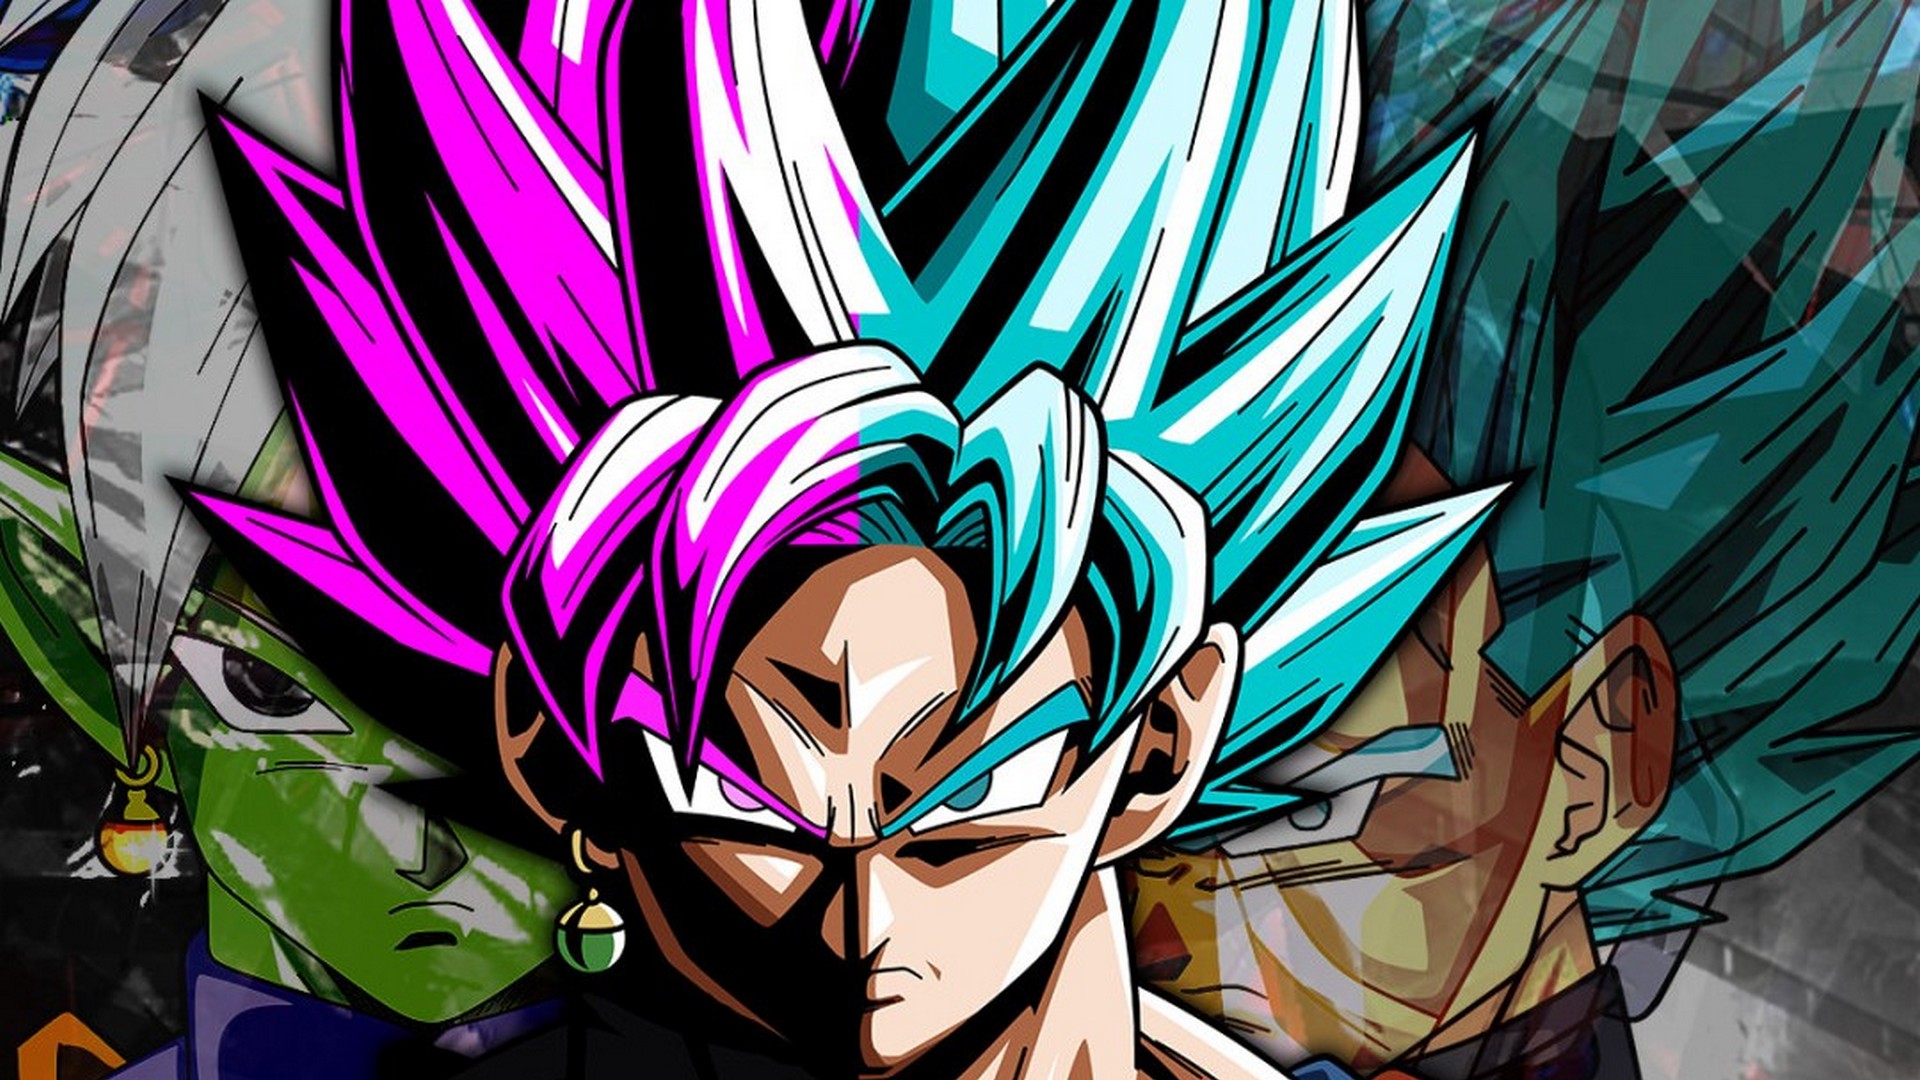 Black Goku Desktop Wallpaper with image resolution 1920x1080 pixel. You can use this wallpaper as background for your desktop Computer Screensavers, Android or iPhone smartphones